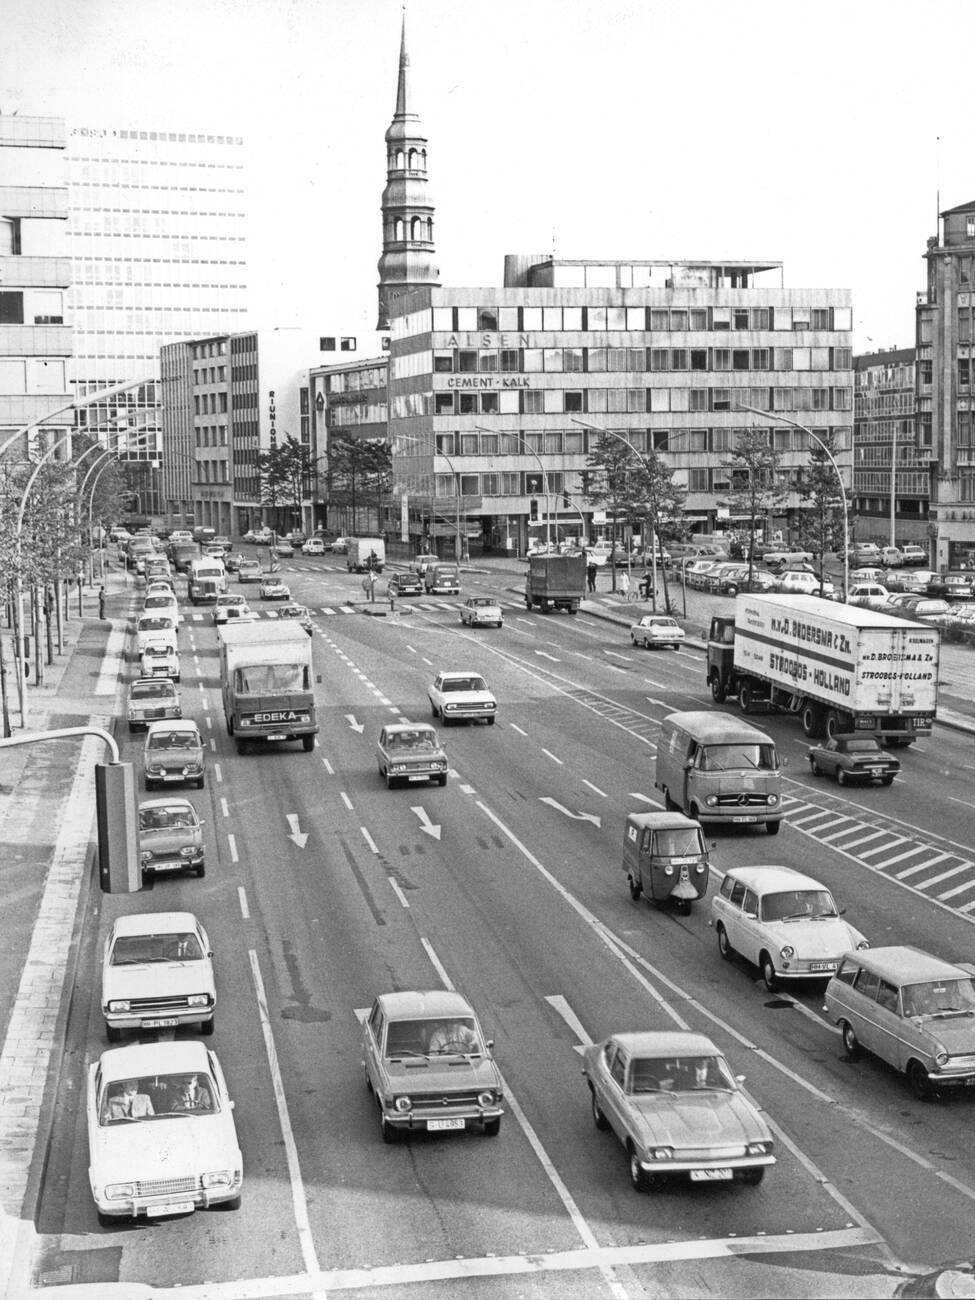 A view of Willy-Brandt-Strasse in Hamburg, Germany in 1970.